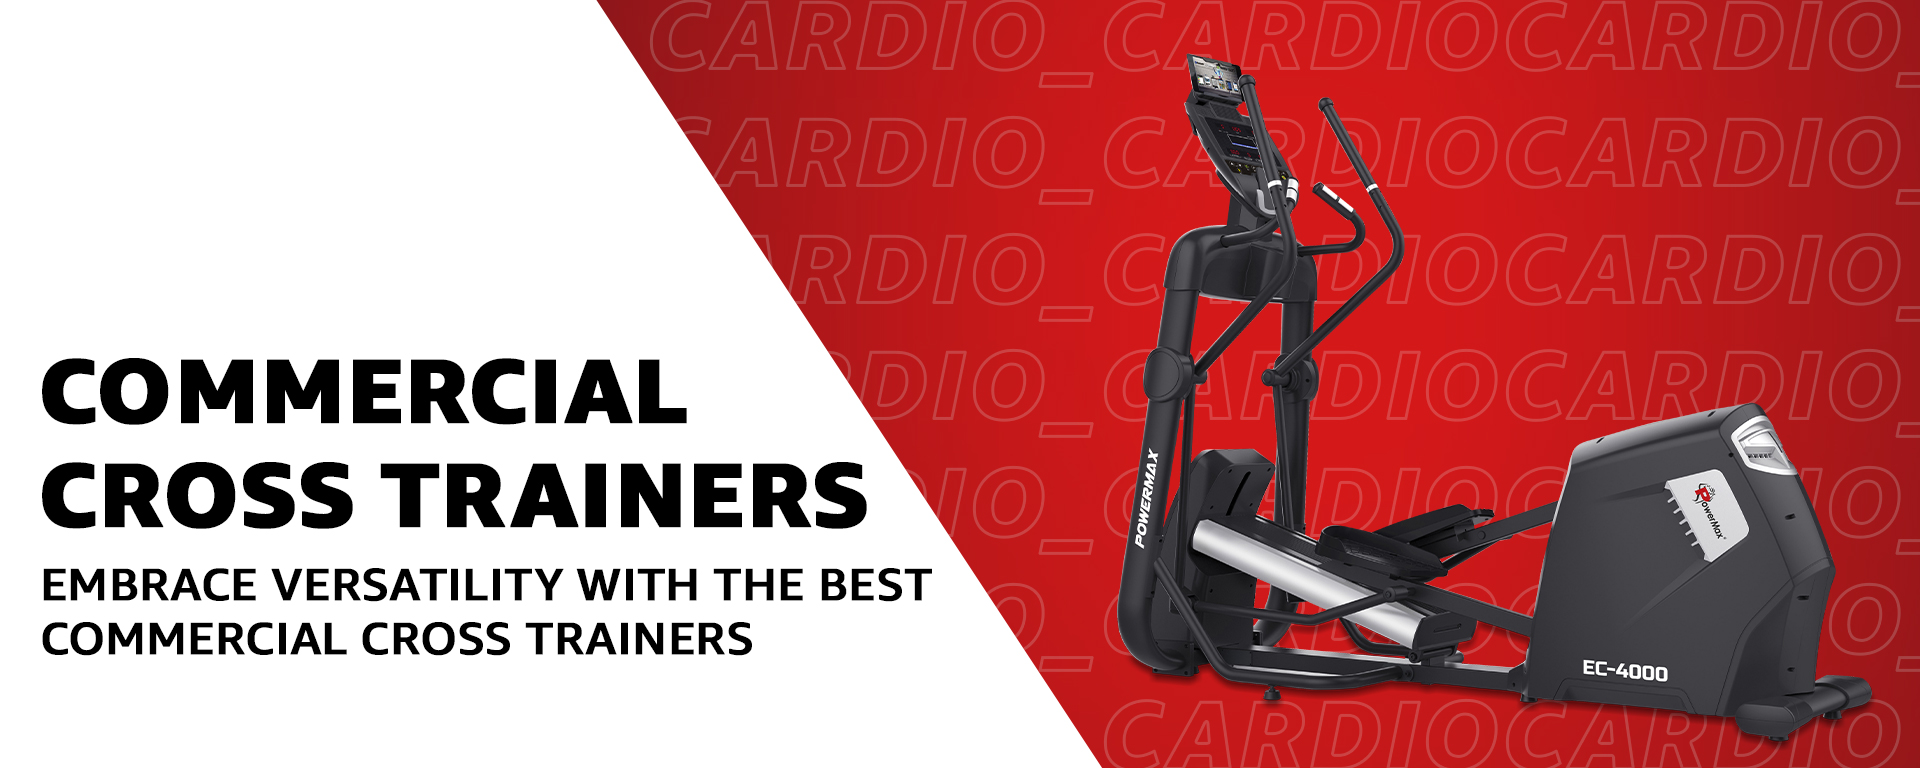 use > cardio > commercial cross trainers